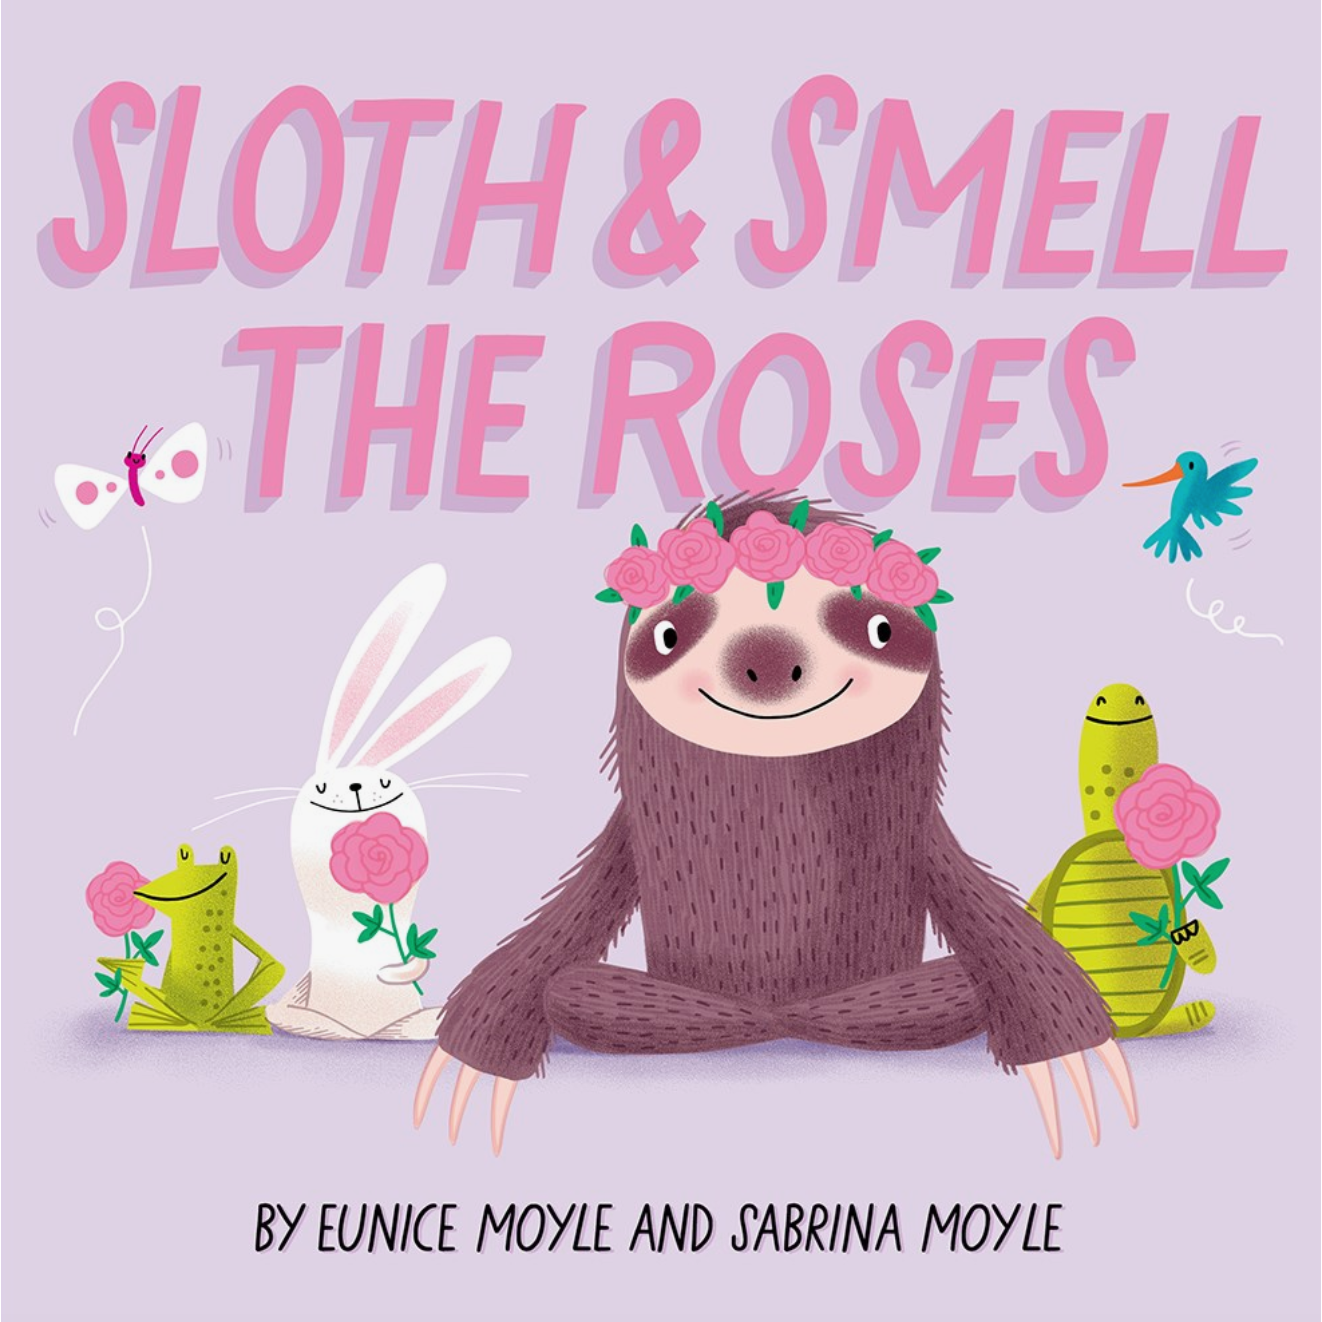 sloth and smell the roses book